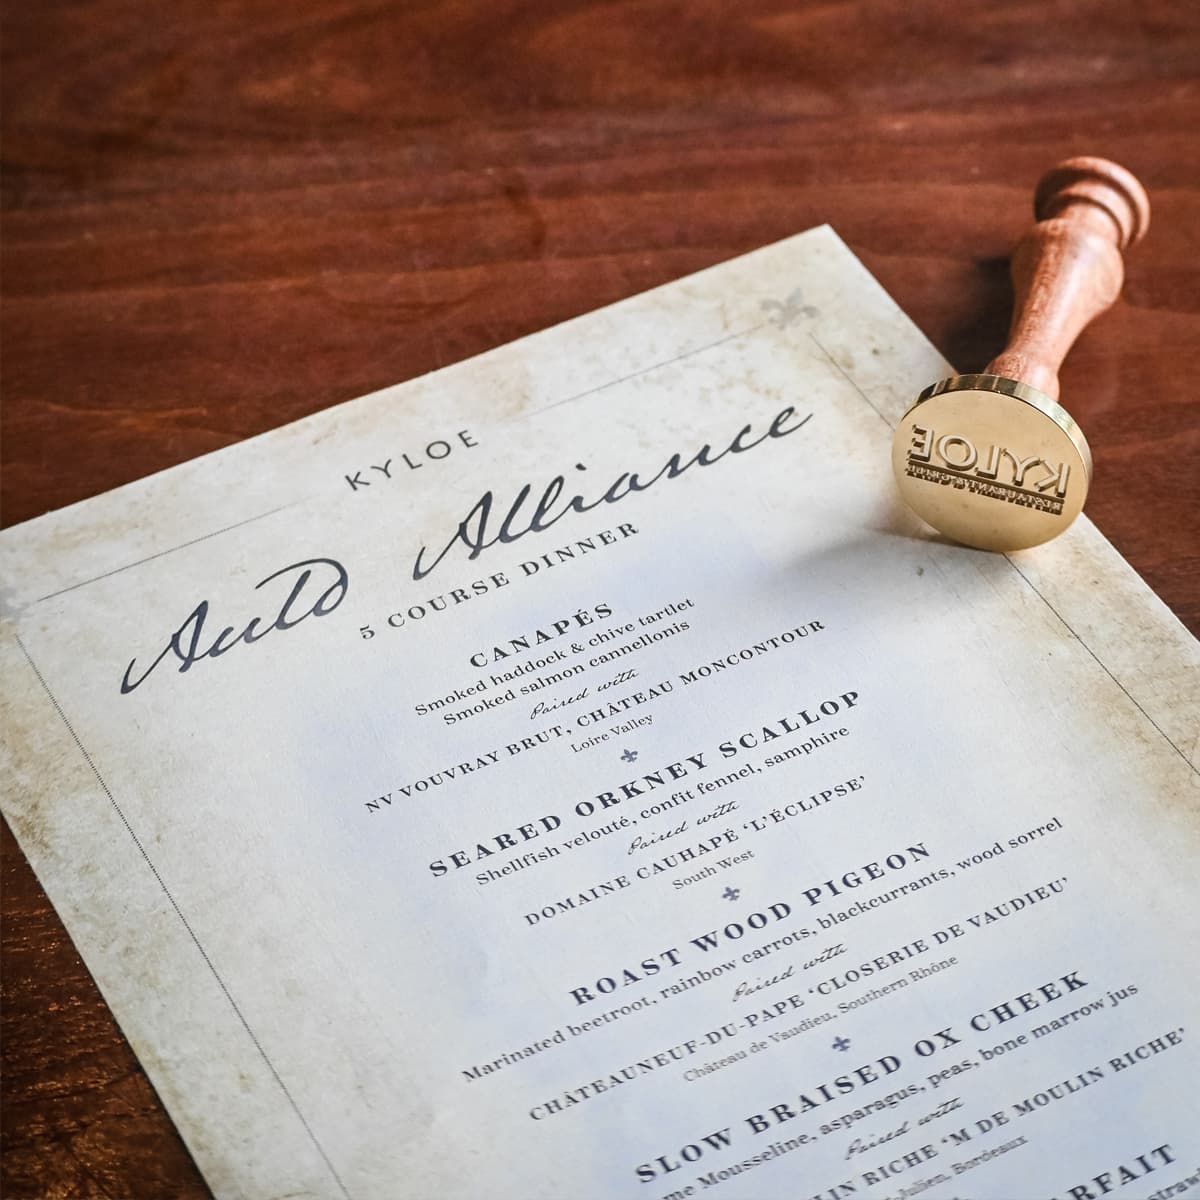 The Auld Alliance Wine Dining Menu at Kyloe